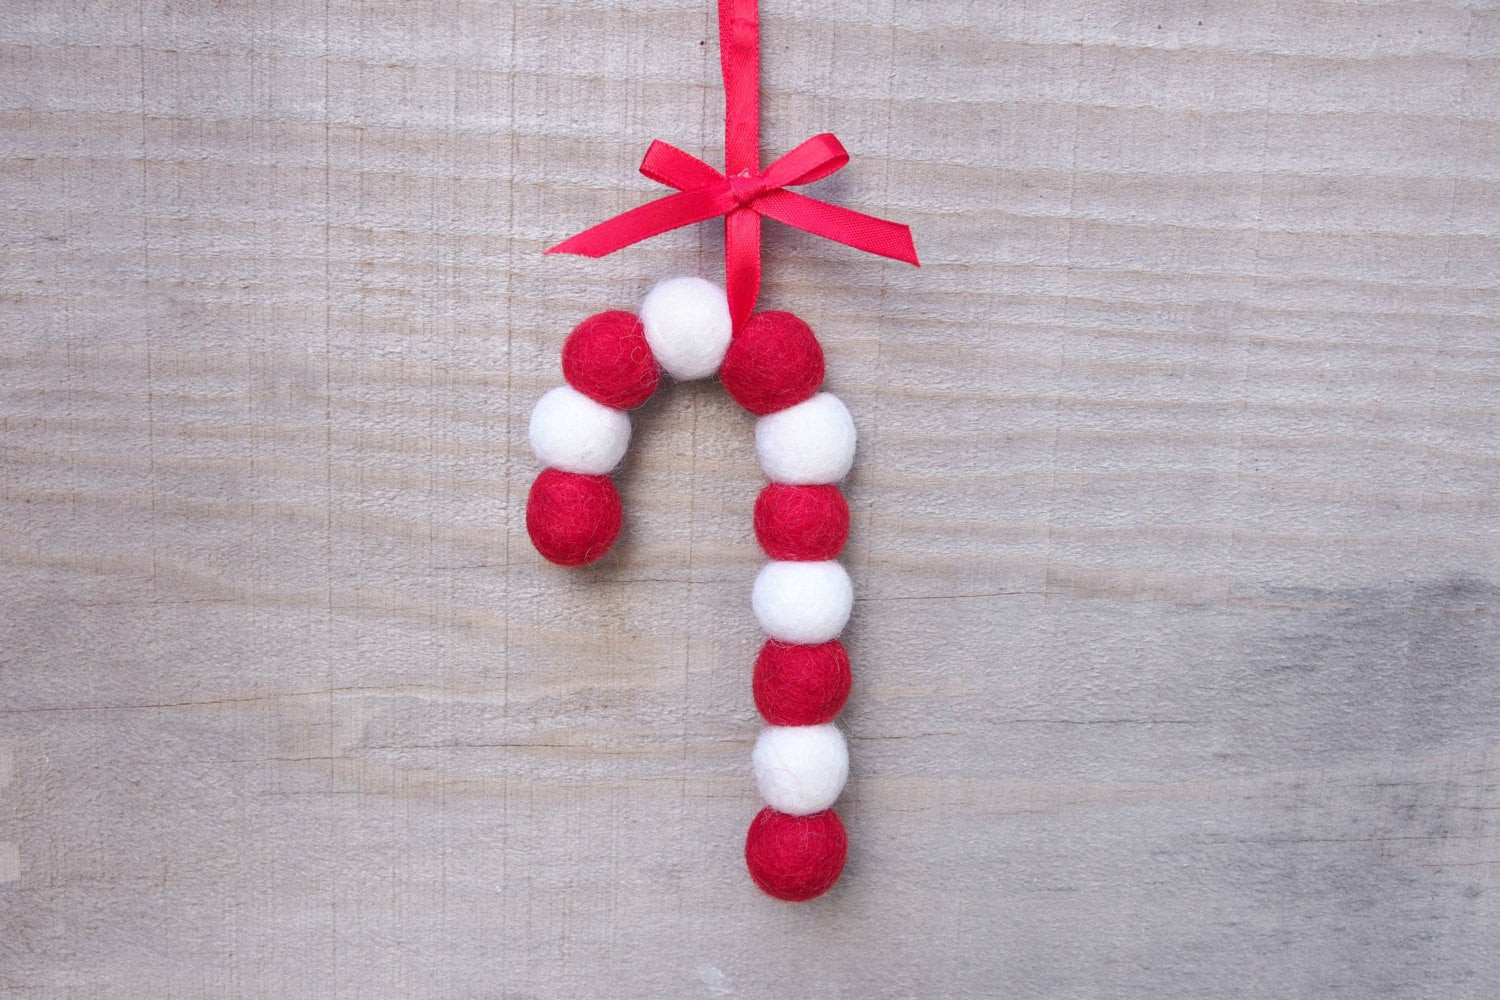 Candy Cane Christmas Tree Ornaments
 Candy Cane Ornament Christmas Tree Decoration